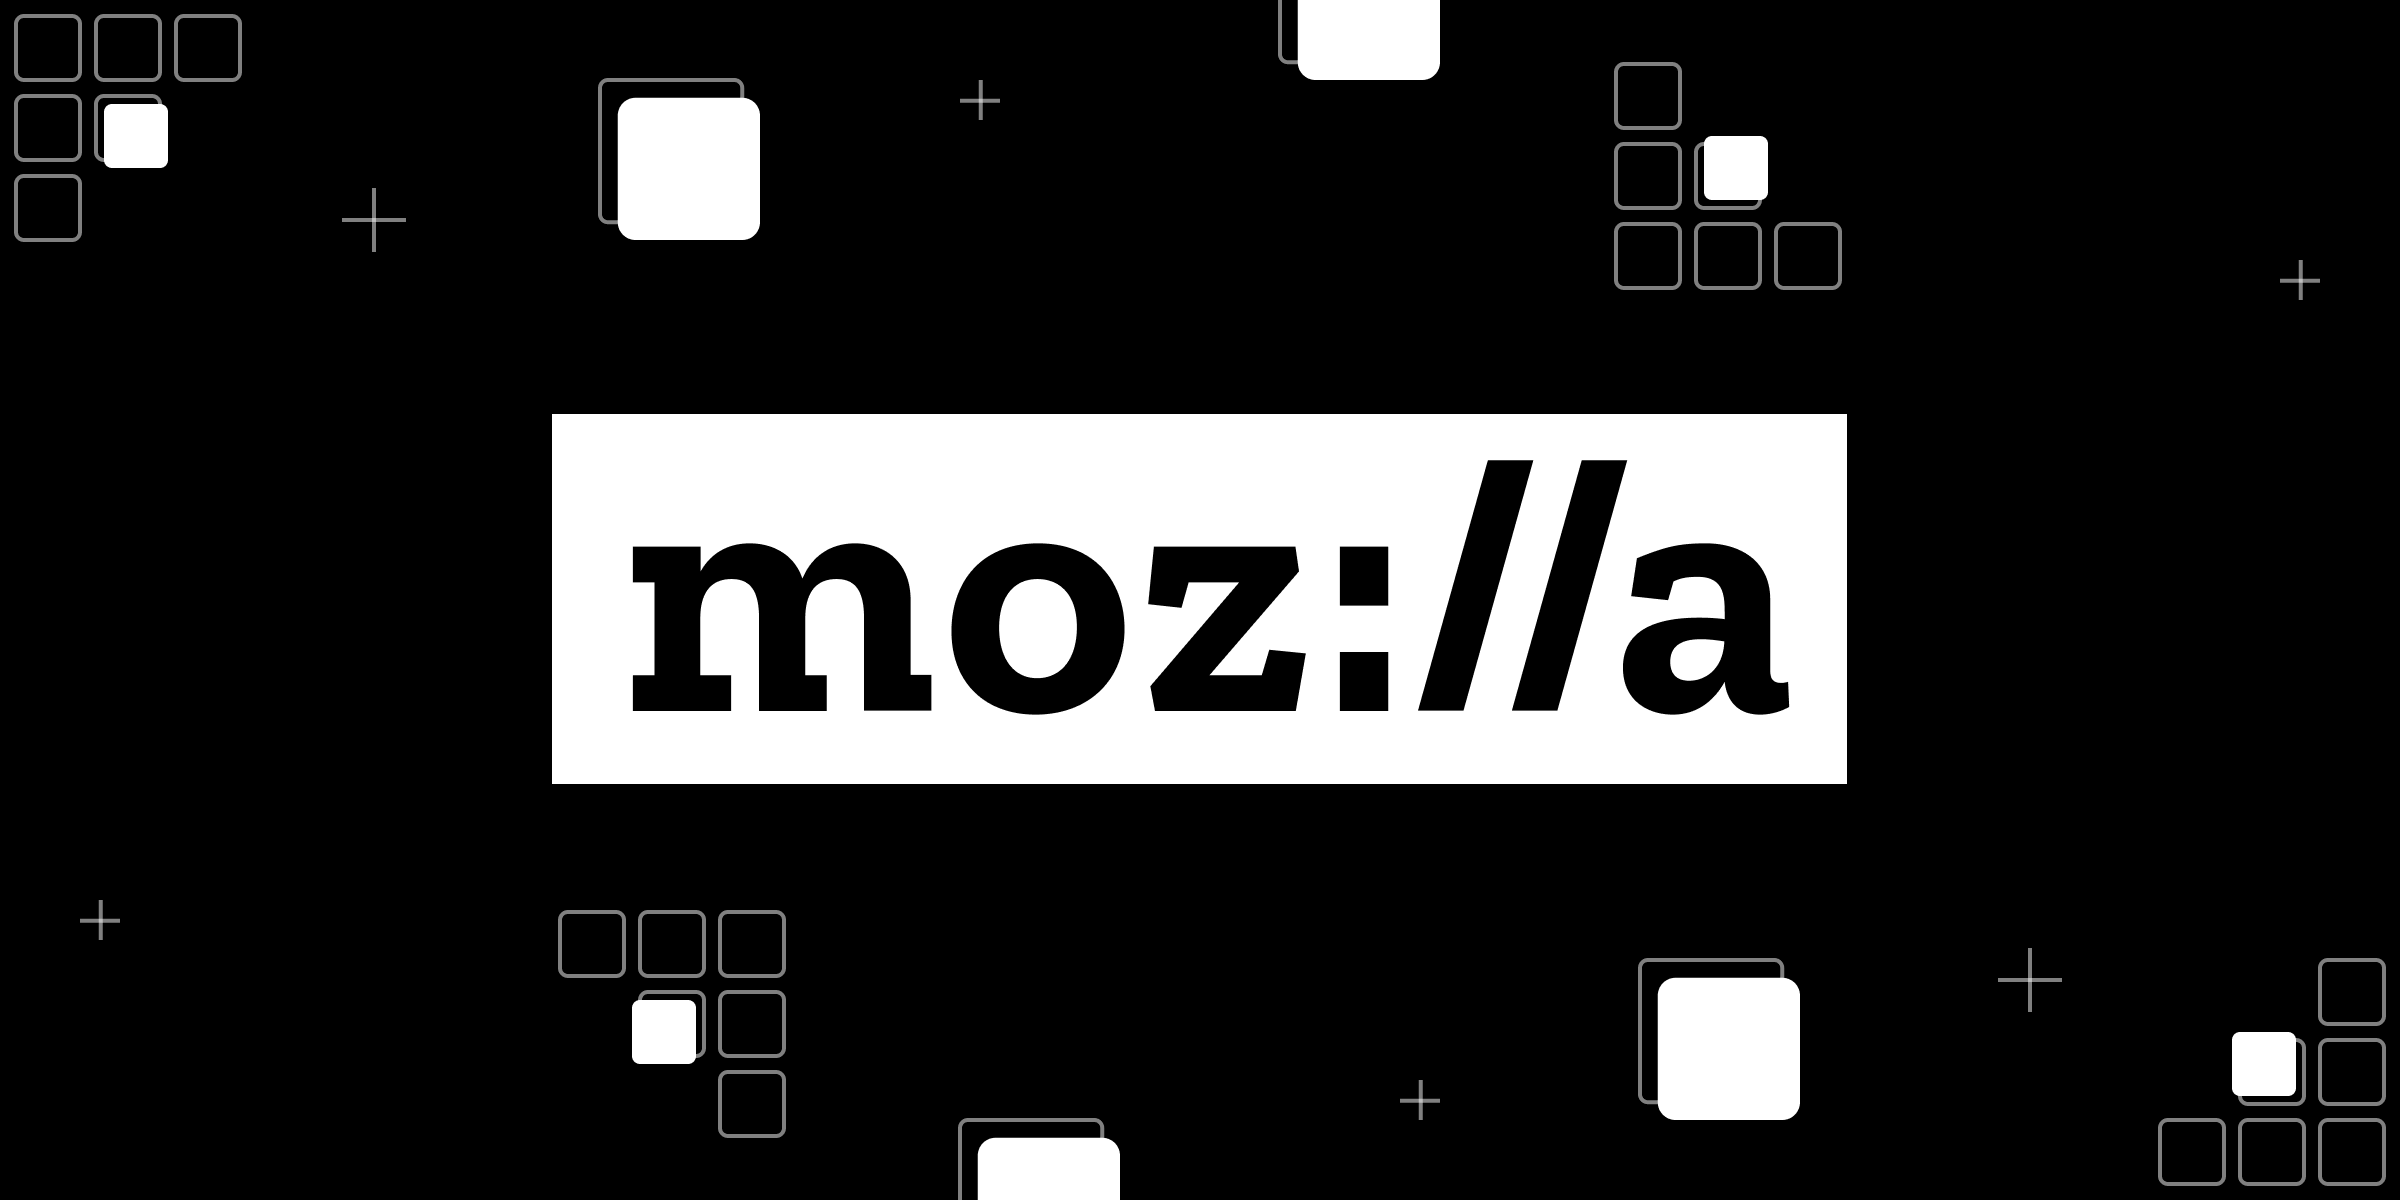 Mozilla Acquires Fakespot: A Step Forward for Personalization or a Concern for Privacy?